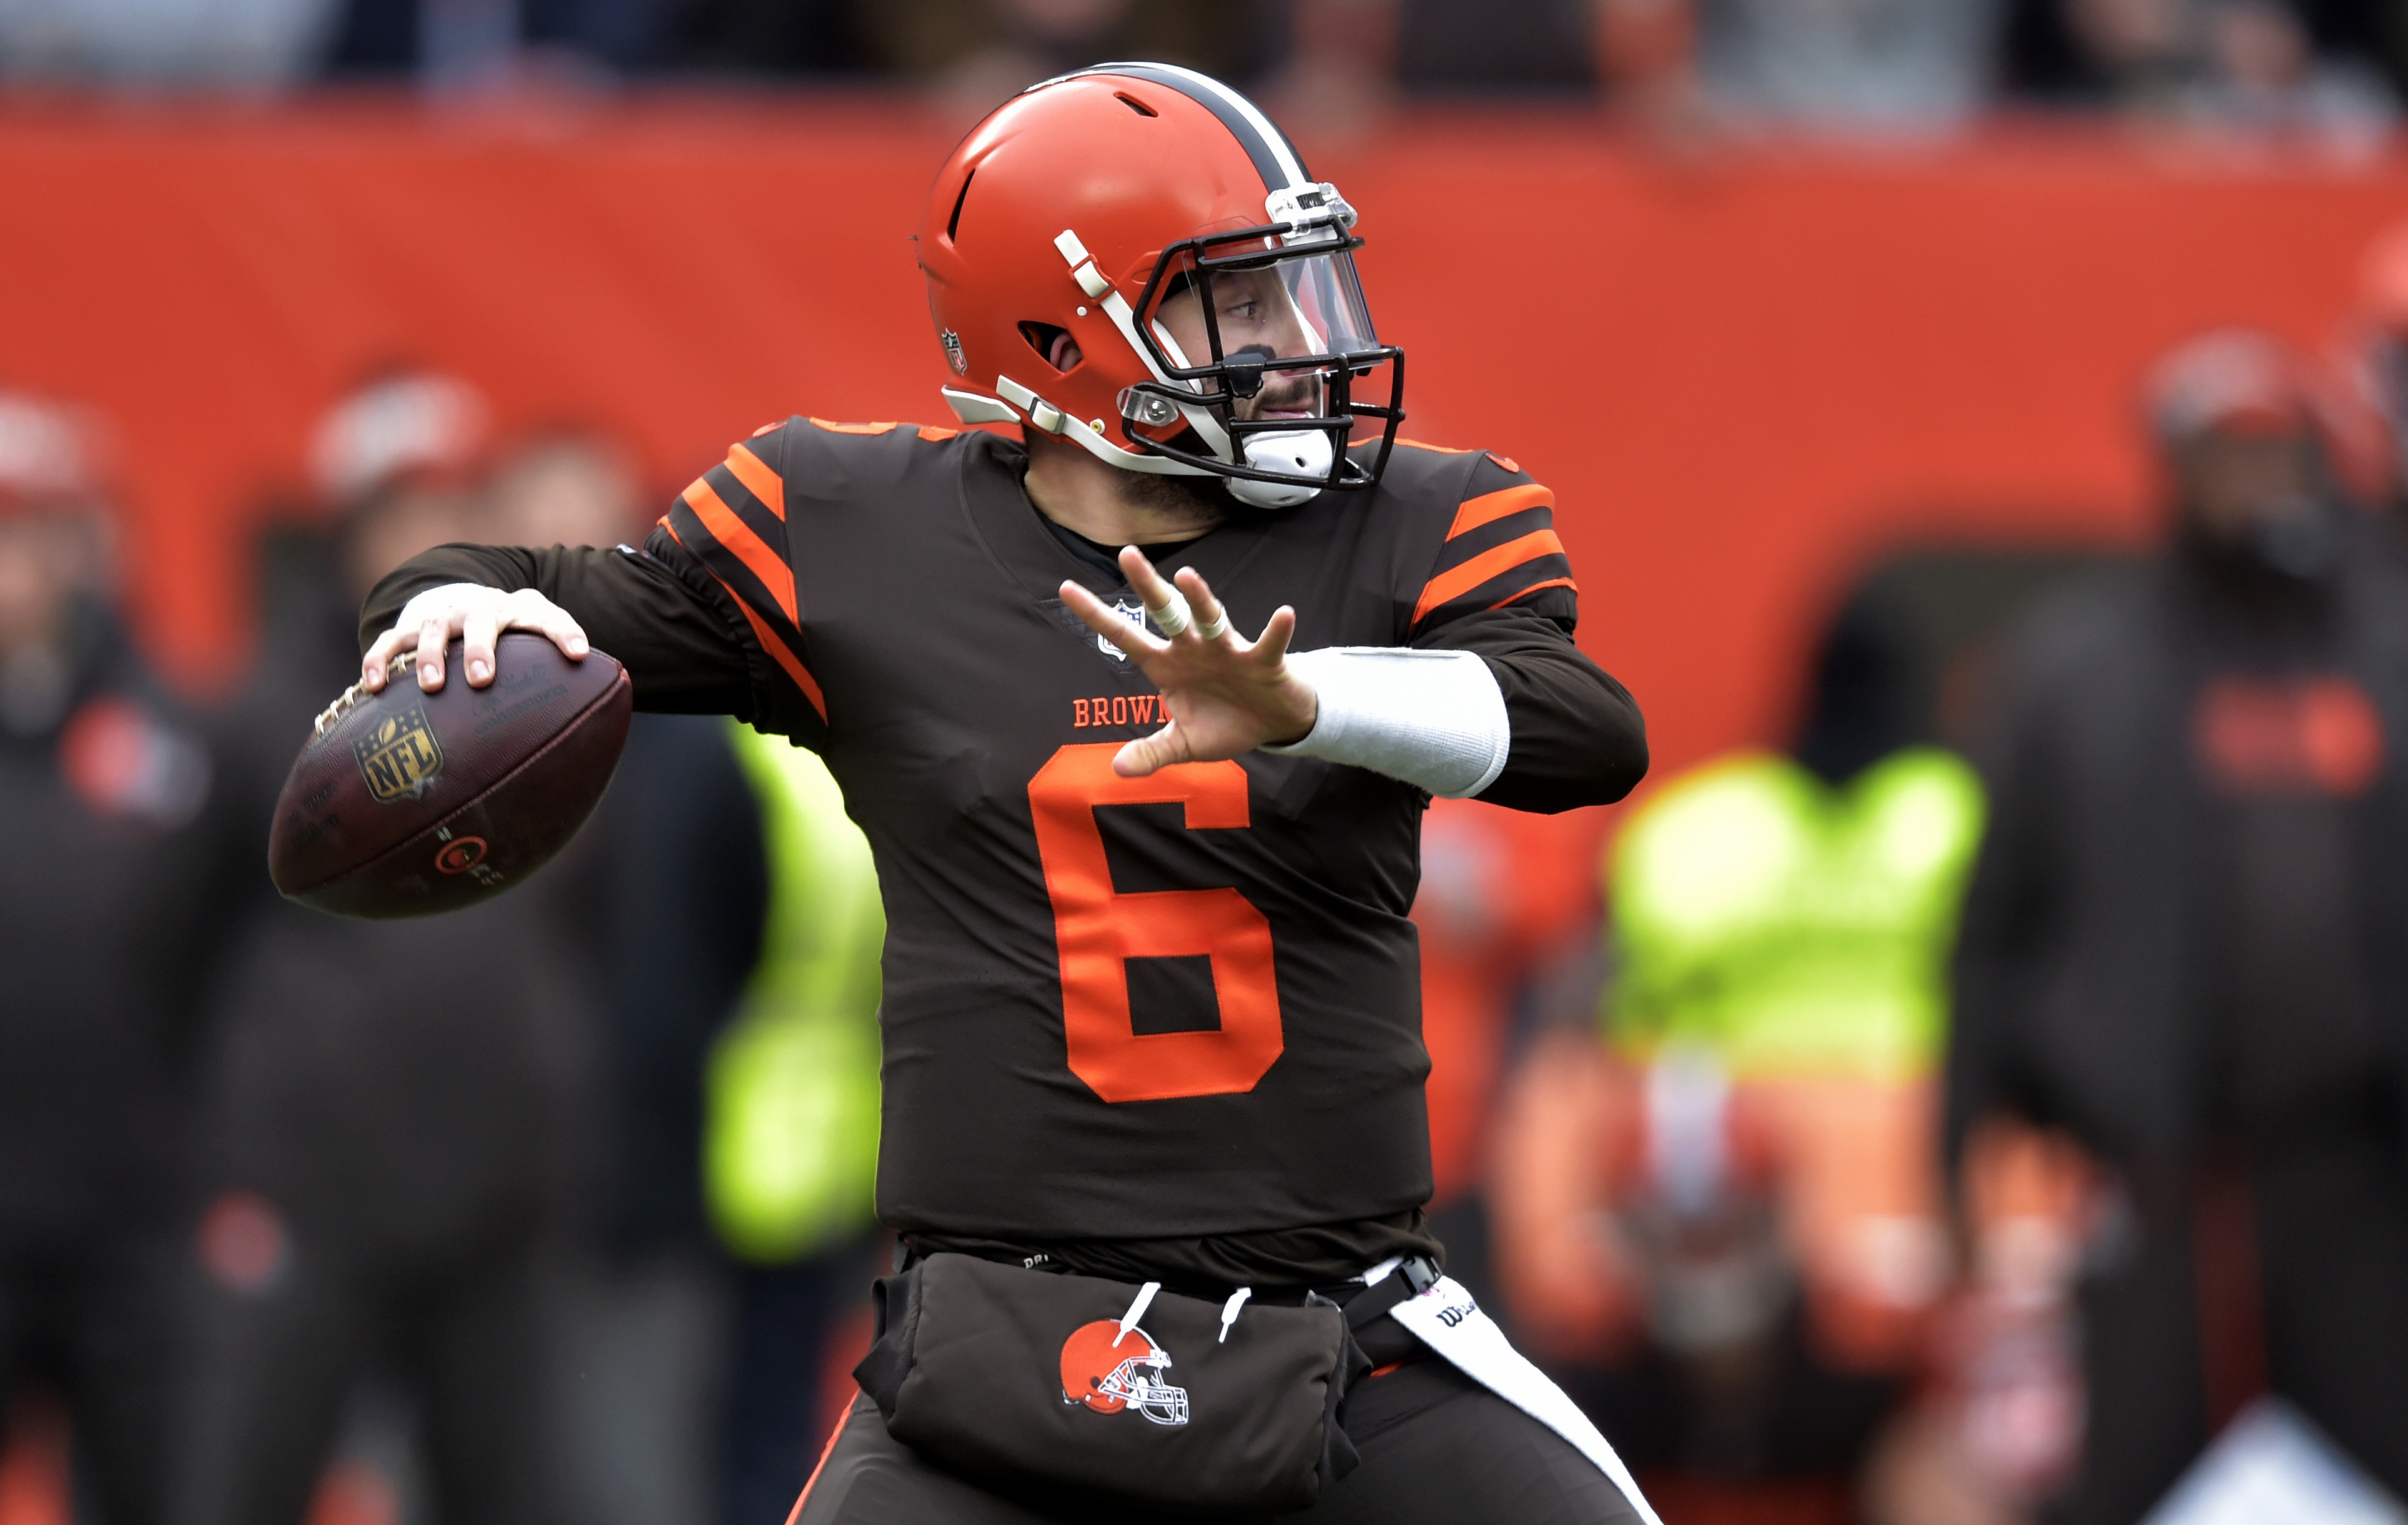 NFL ICYMI: Baker gets a win, and sends his best to Hue